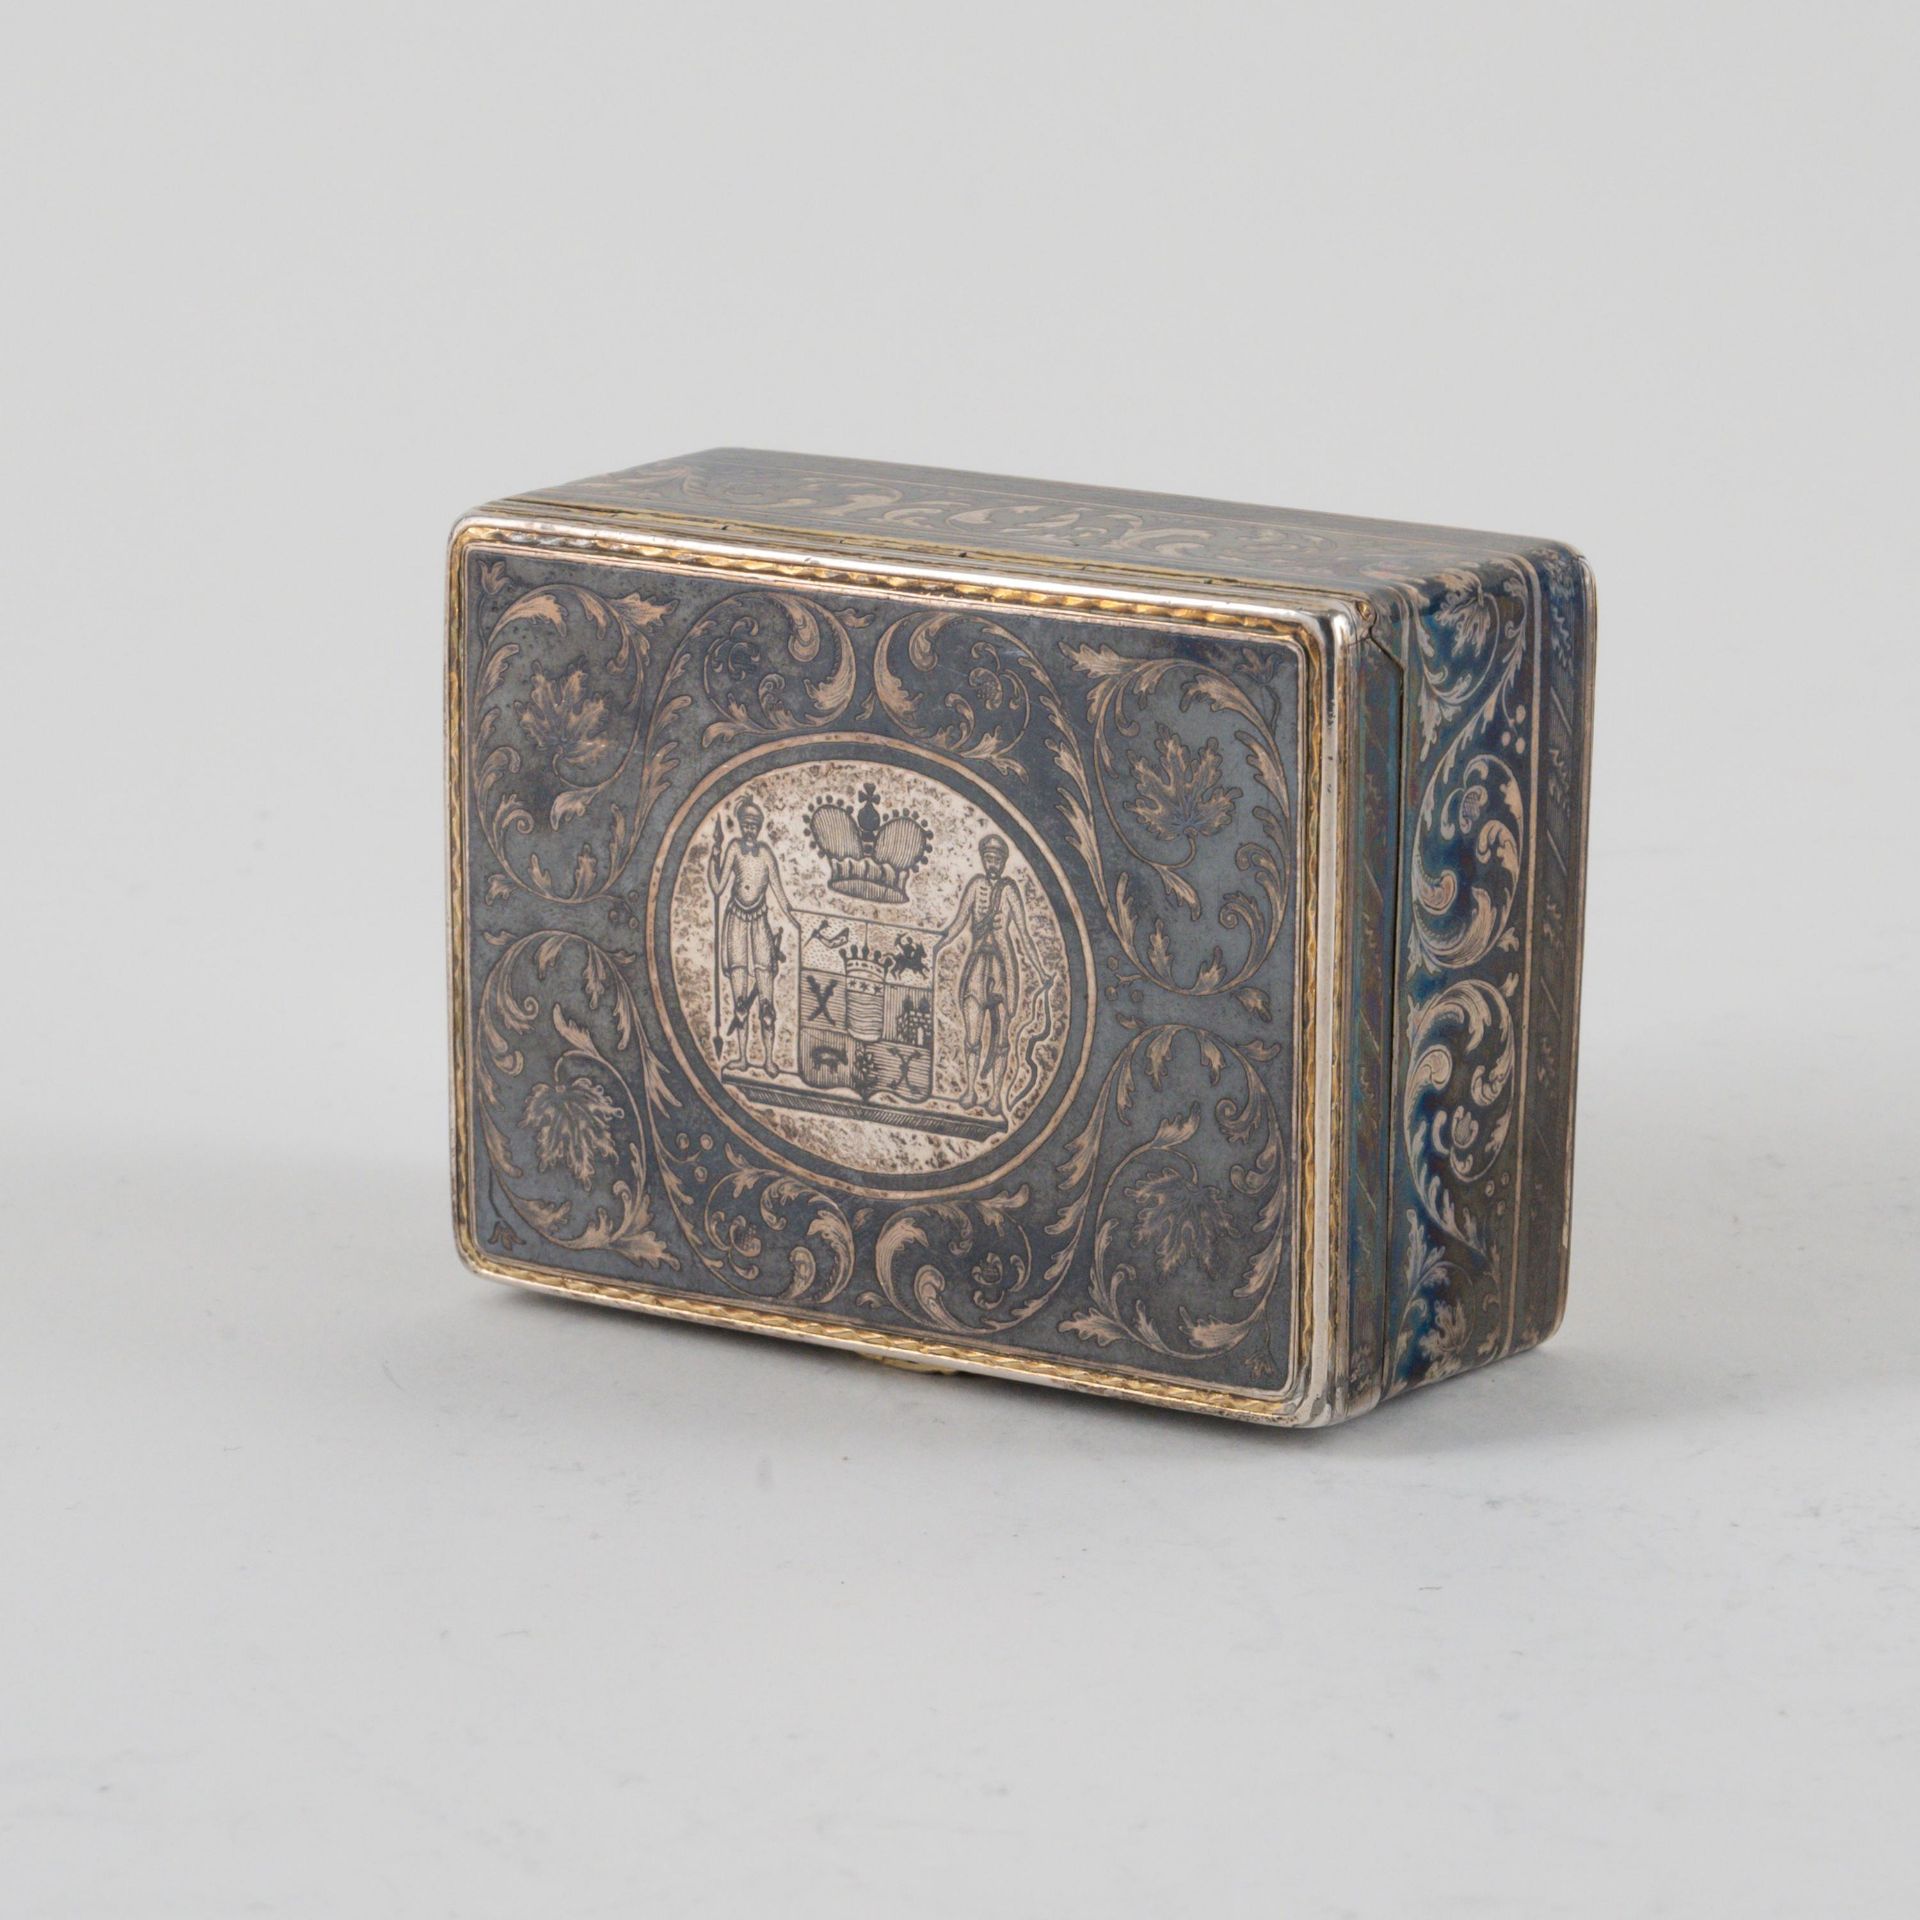 Snuff box with princely coat of arms and city map of Veliki Ustjug - Image 6 of 7